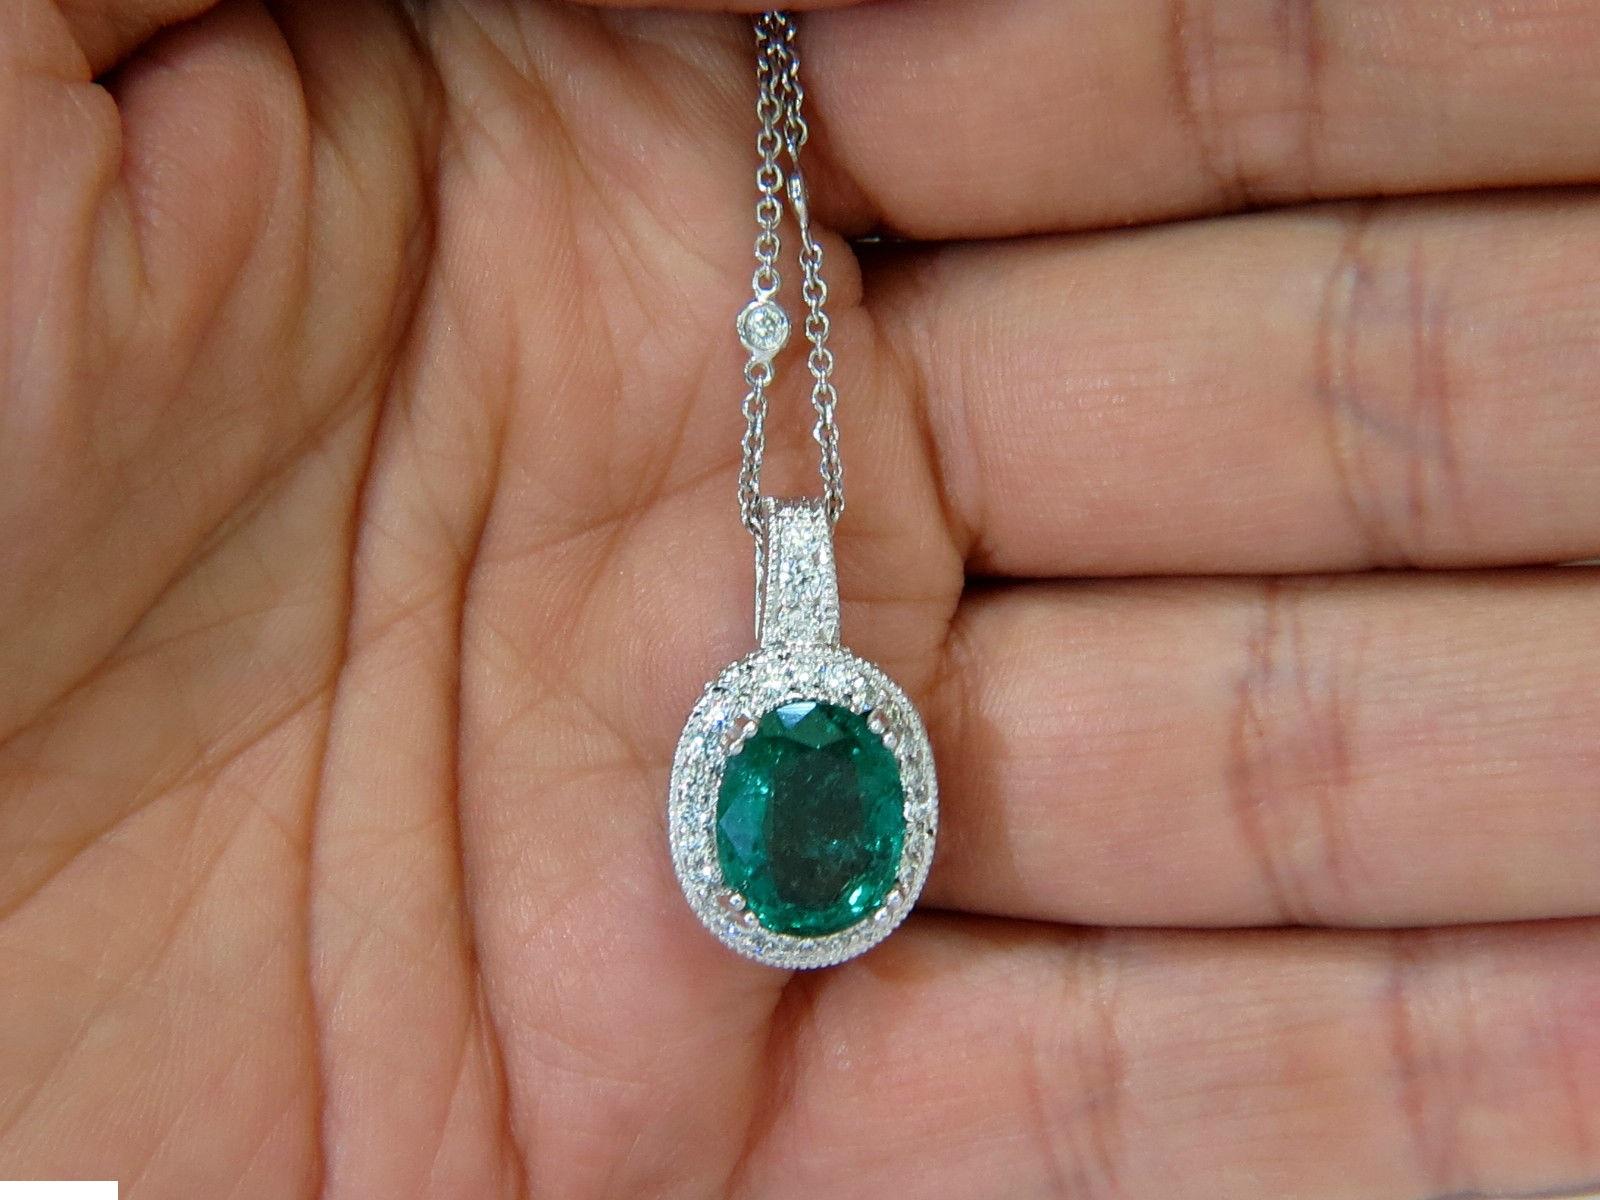 4.65ct. Natural emerald

Vivid green, excellent luster

clean clarity and transparent



(13) Diamonds on chain necklace



Emerald is mounted in diamonds pendant

With diamonds all around even on sides



Total weight of diamonds (pendant &